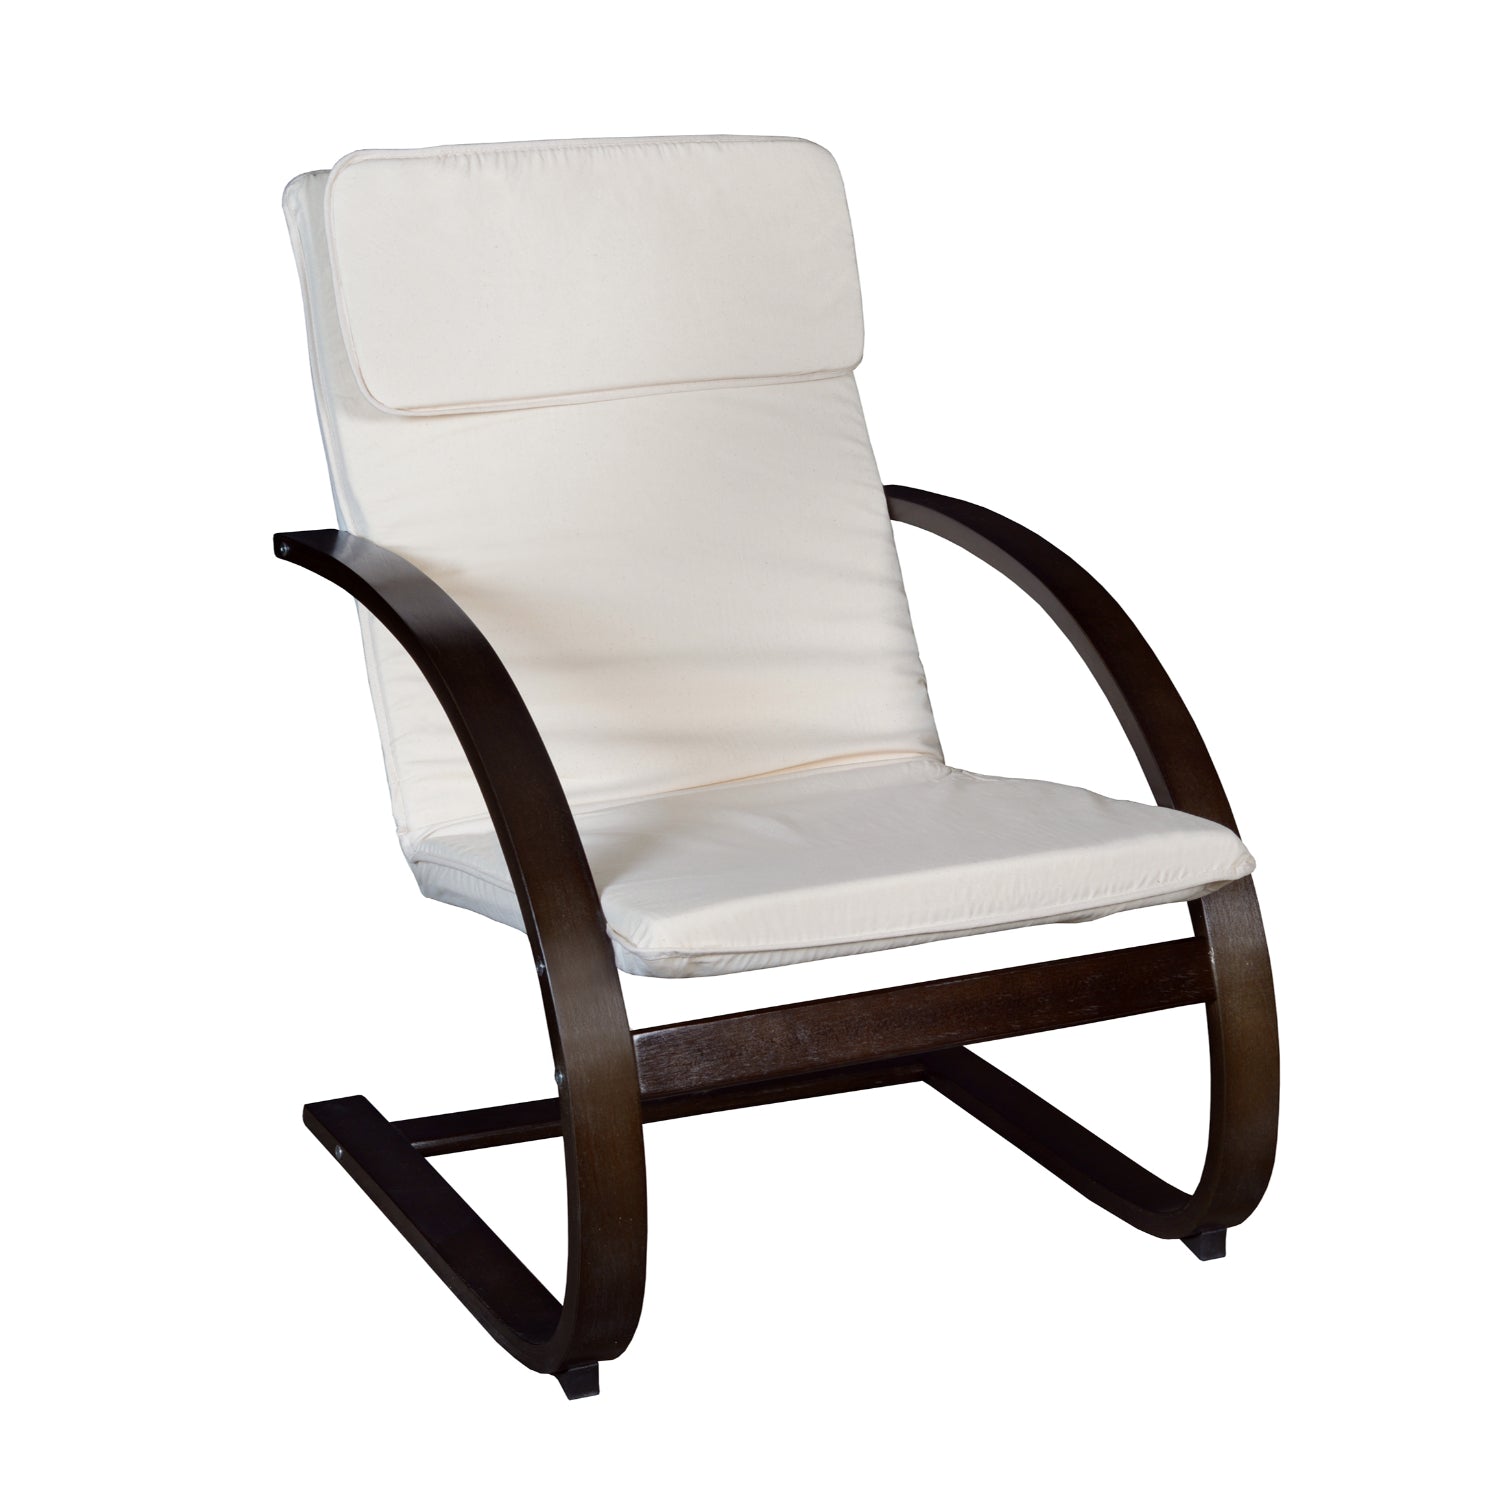 Niche Mia Bentwood Reclining Chair with Mocha Walnut Frame Finish, Beige Upholstery